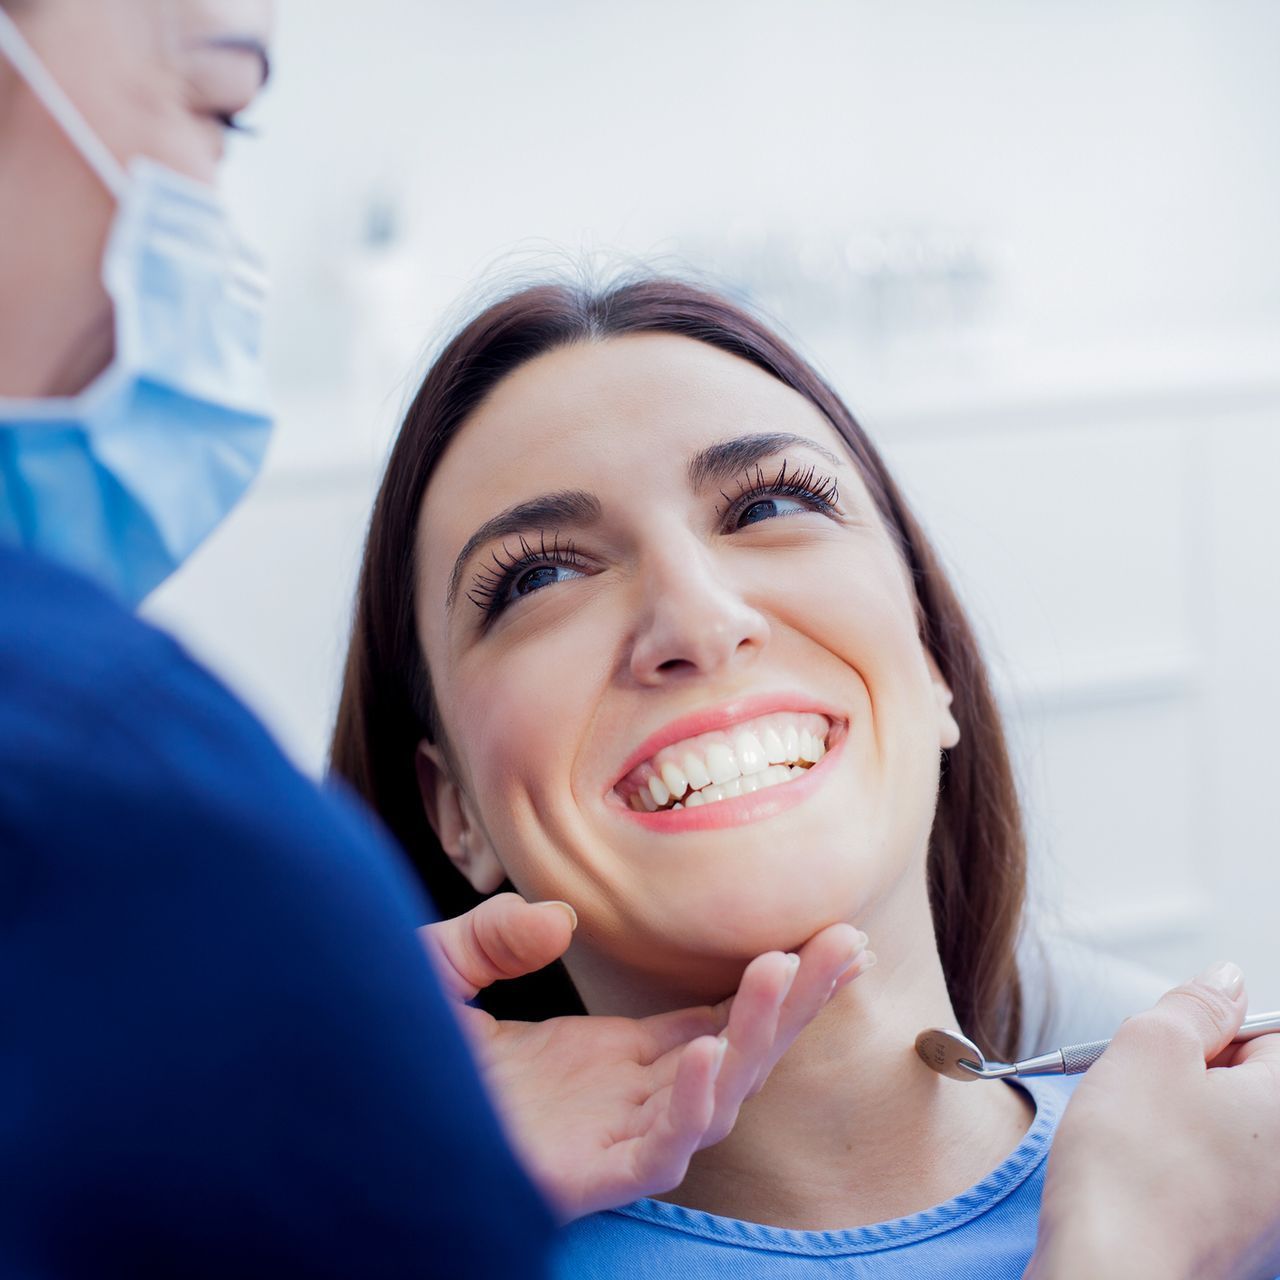 A woman is smiling while having her teeth examined by a dentist